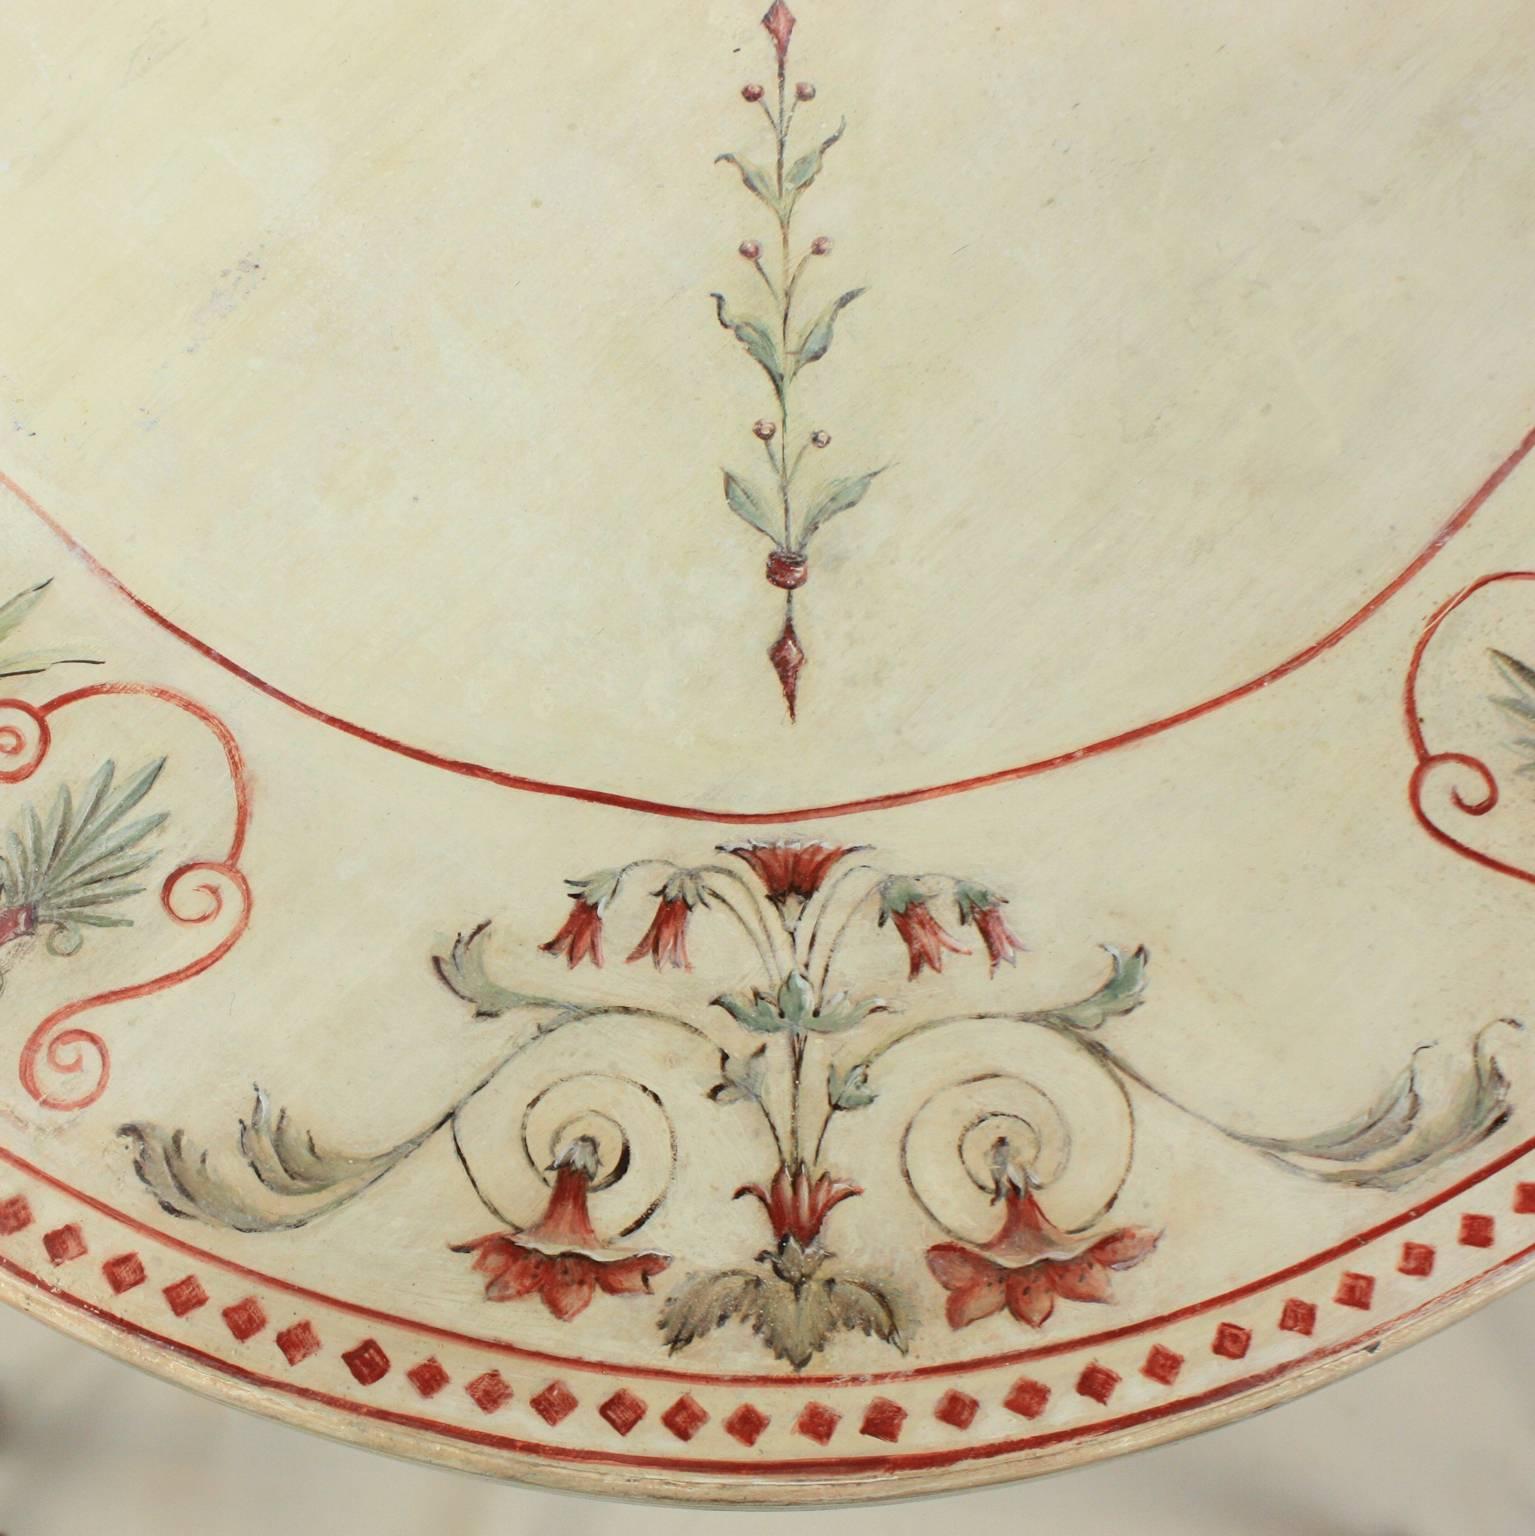 A 19th century English white, red and green/ blue painted breakfast table, with a central fan motiv, a diagonal foliate and flower interlinkage to the border decoration comprising of four different flower motifs on each corner and a Greek cyma link